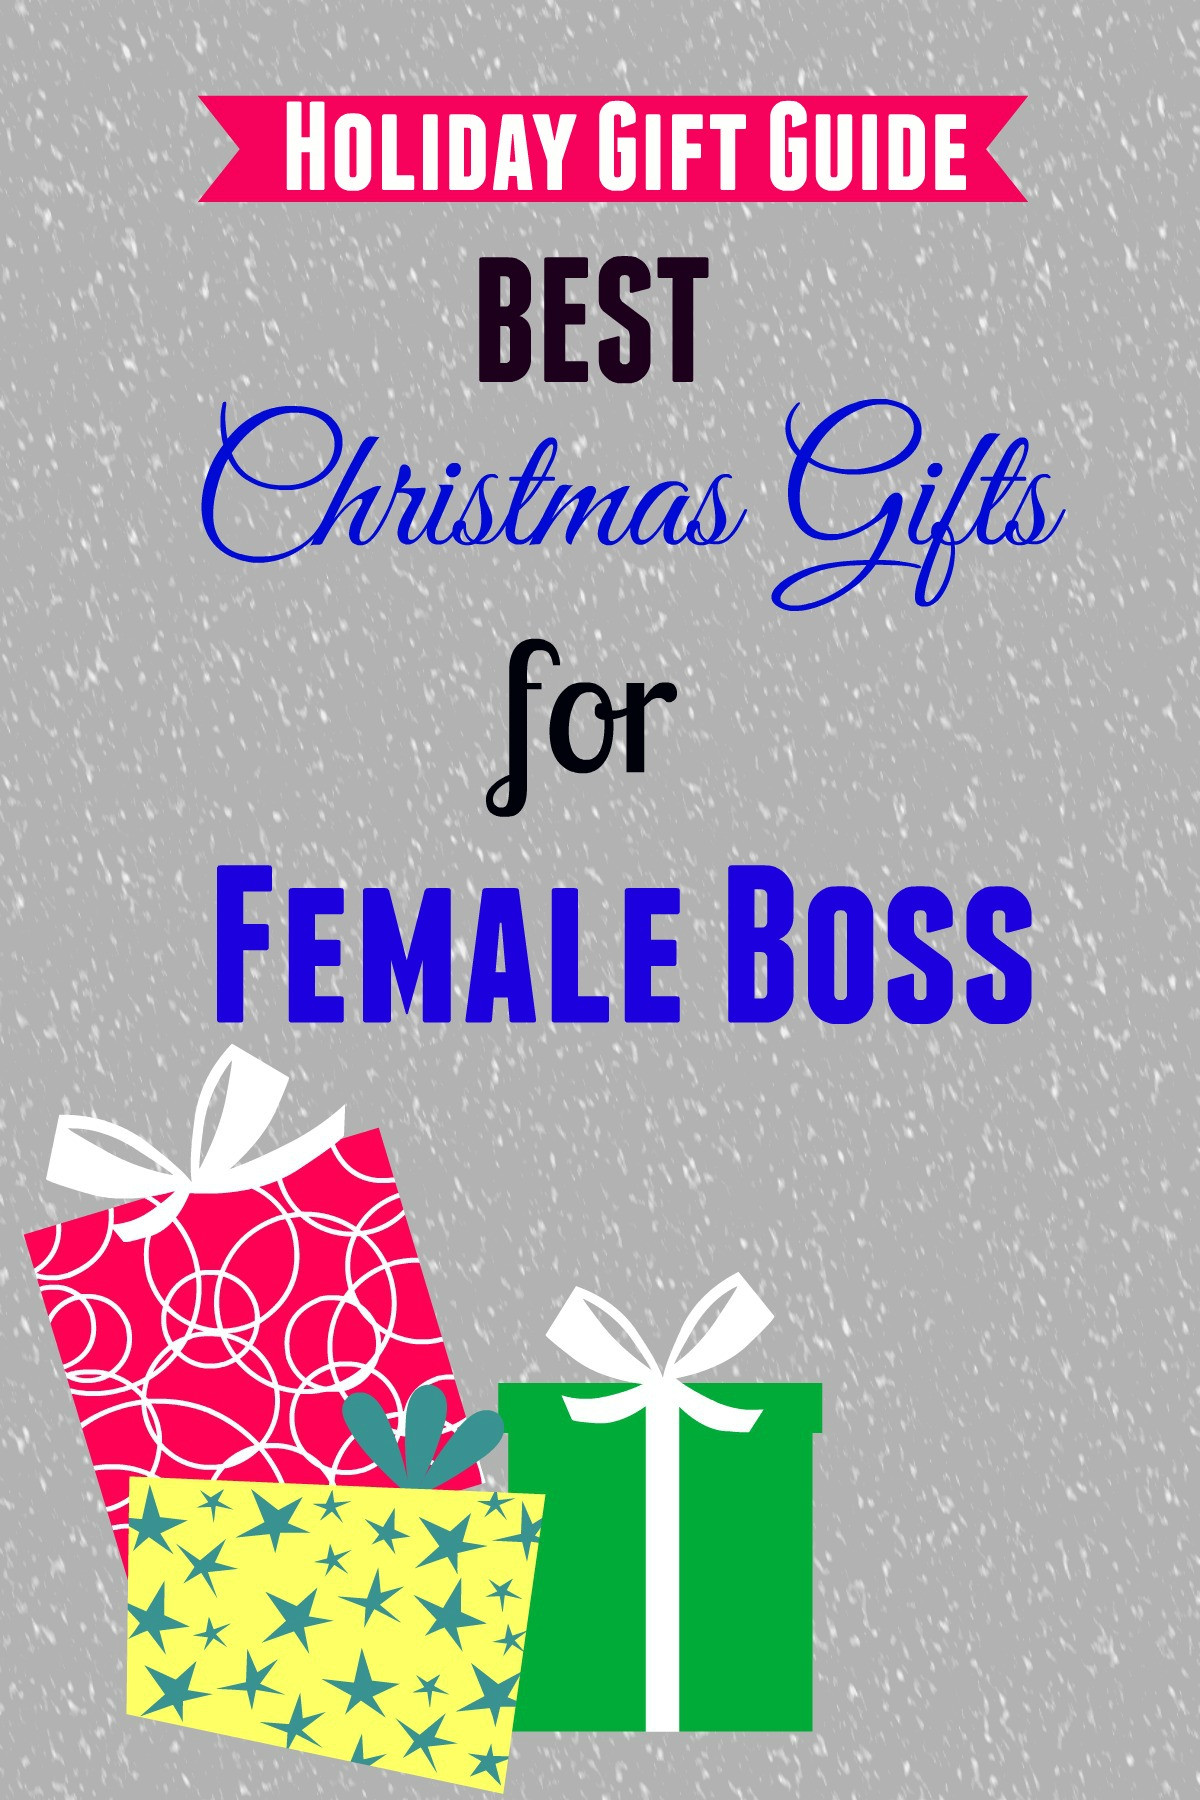 Holiday Gift Ideas For Bosses
 holiday ts for boss – Girls Gift Blog